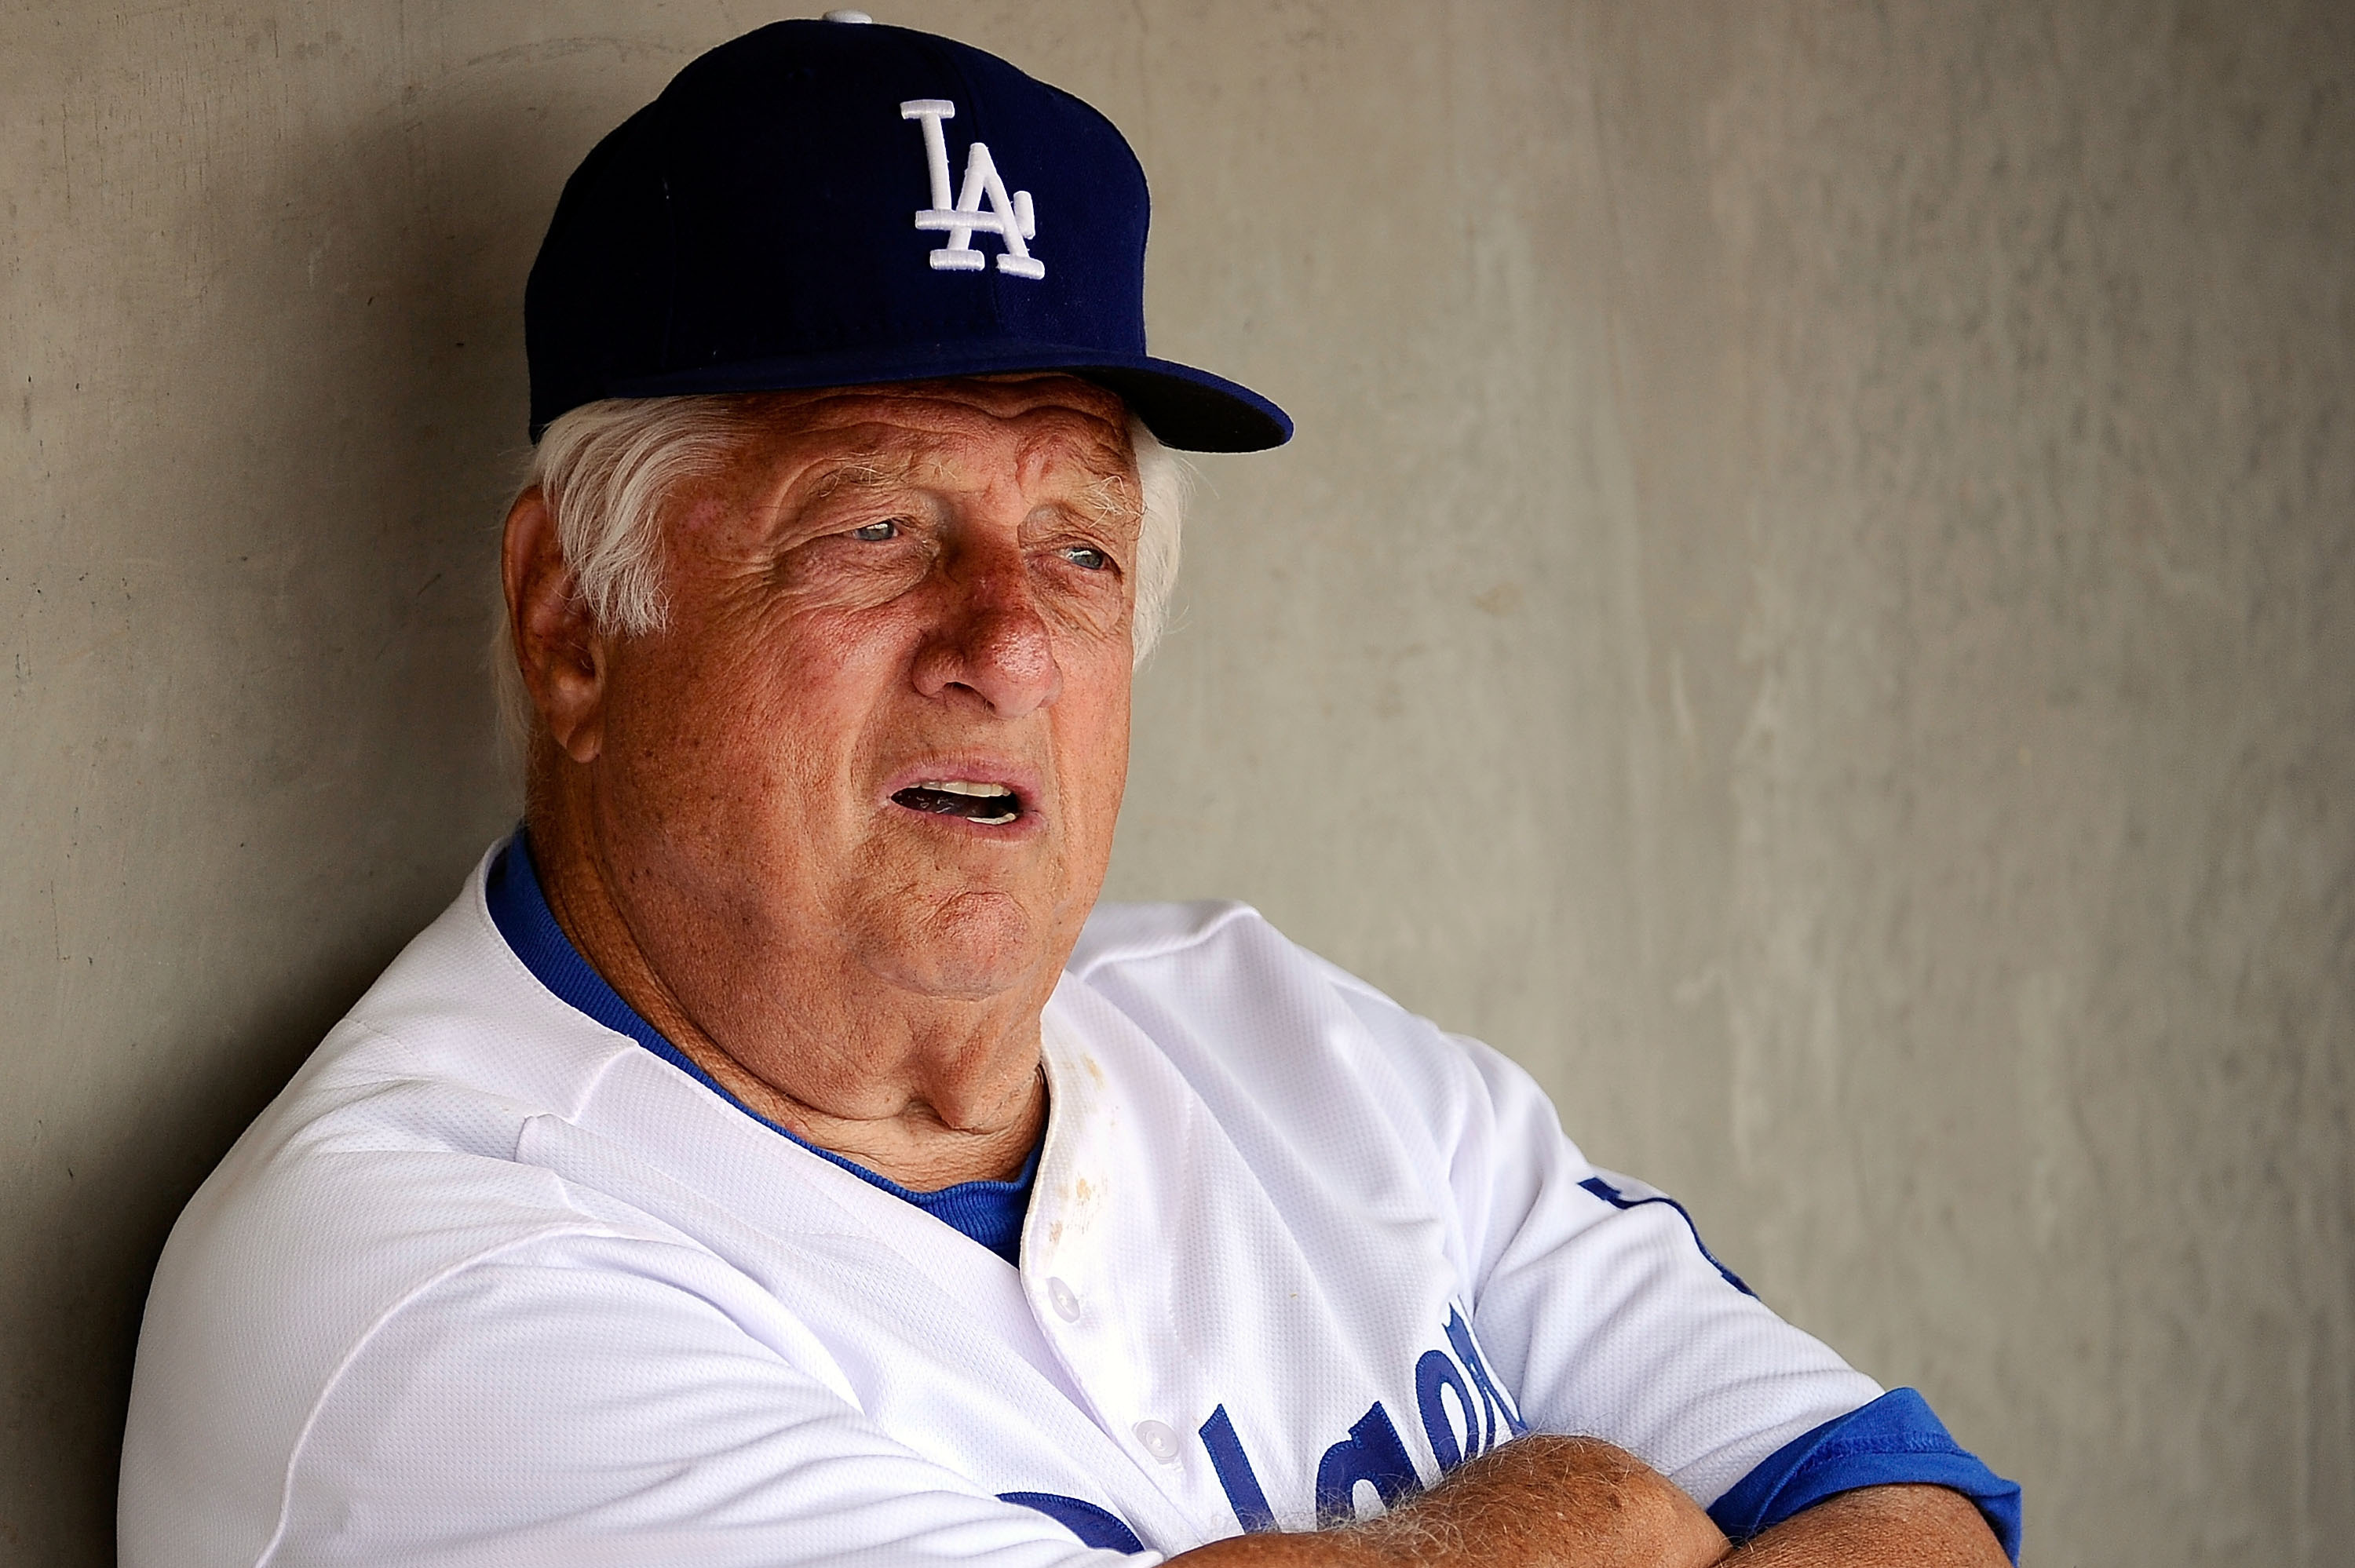 Dodgers Dugout: The 25 greatest Dodgers of all time, No. 22: Kirk